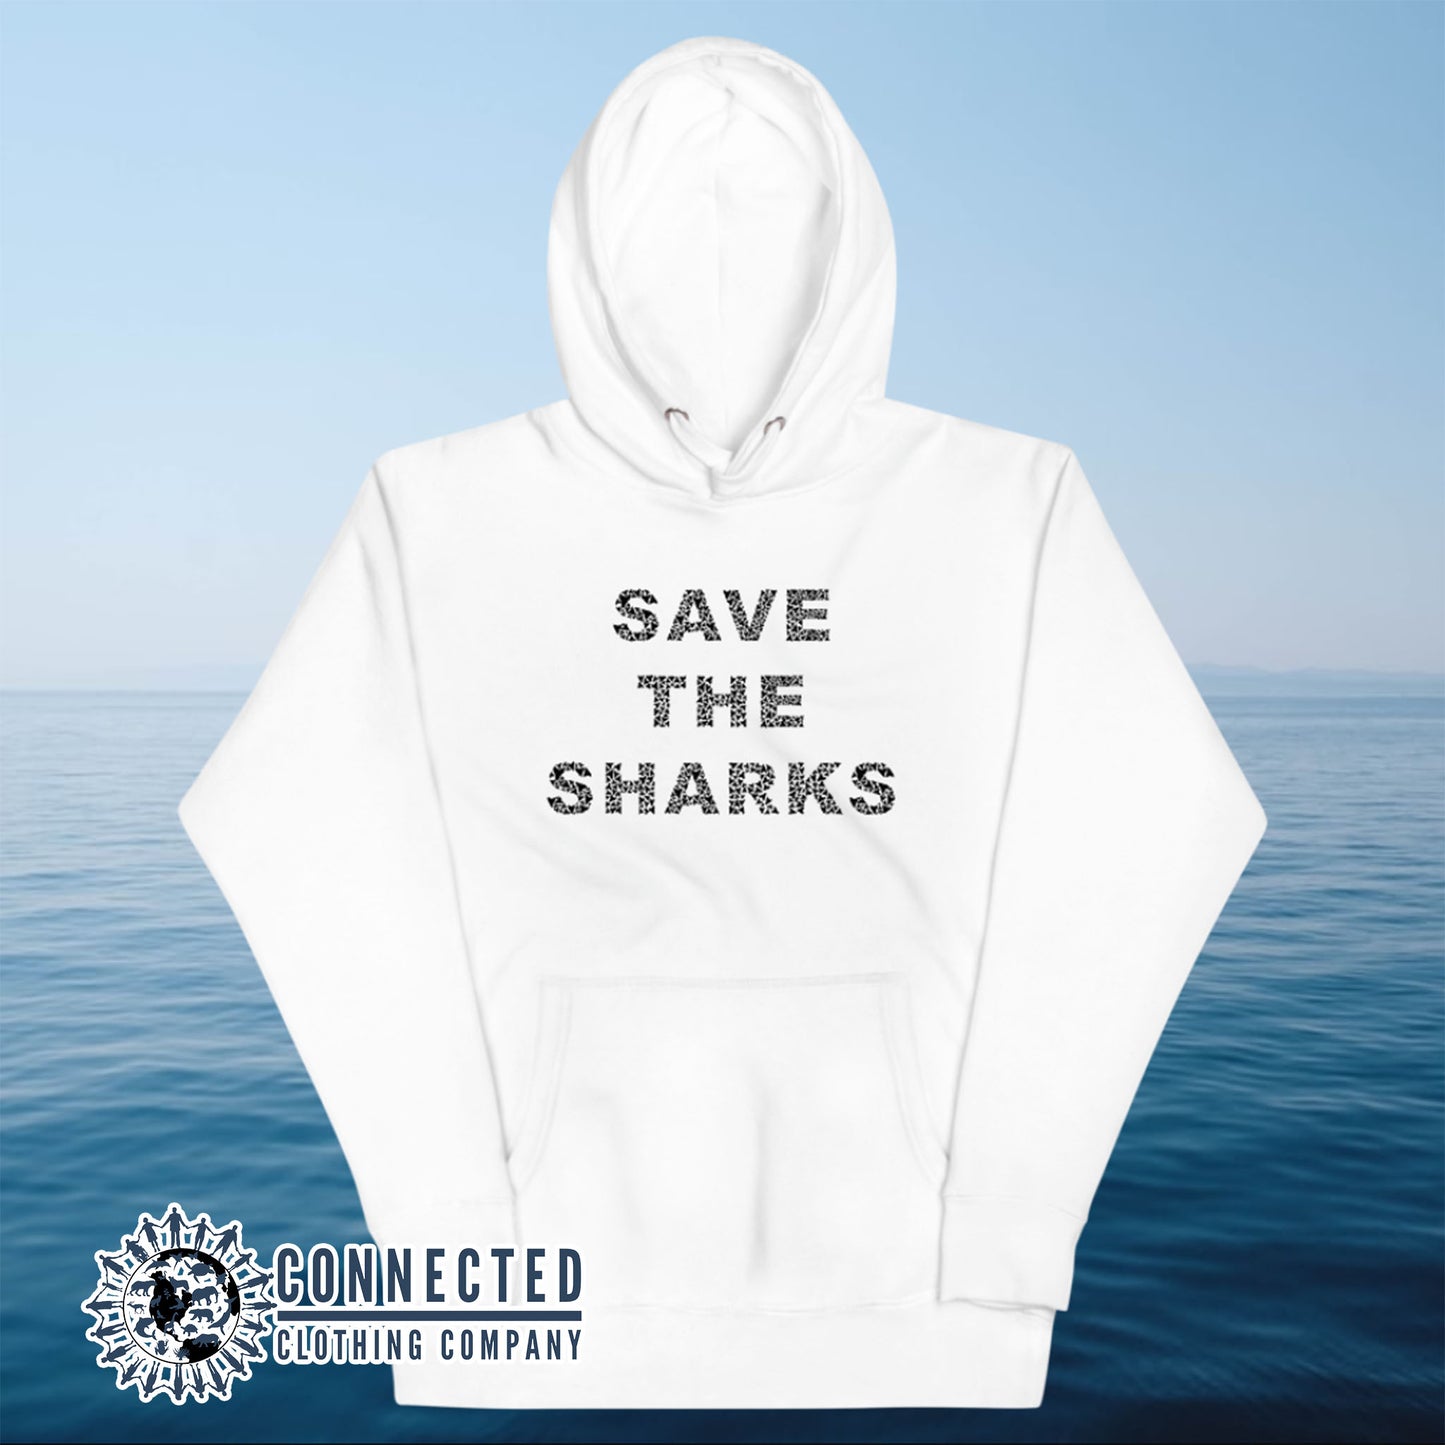 White Save The Sharks Unisex Hoodie - Connected Clothing Company - Ethically and Sustainably Made - 10% donated to Oceana shark conservation